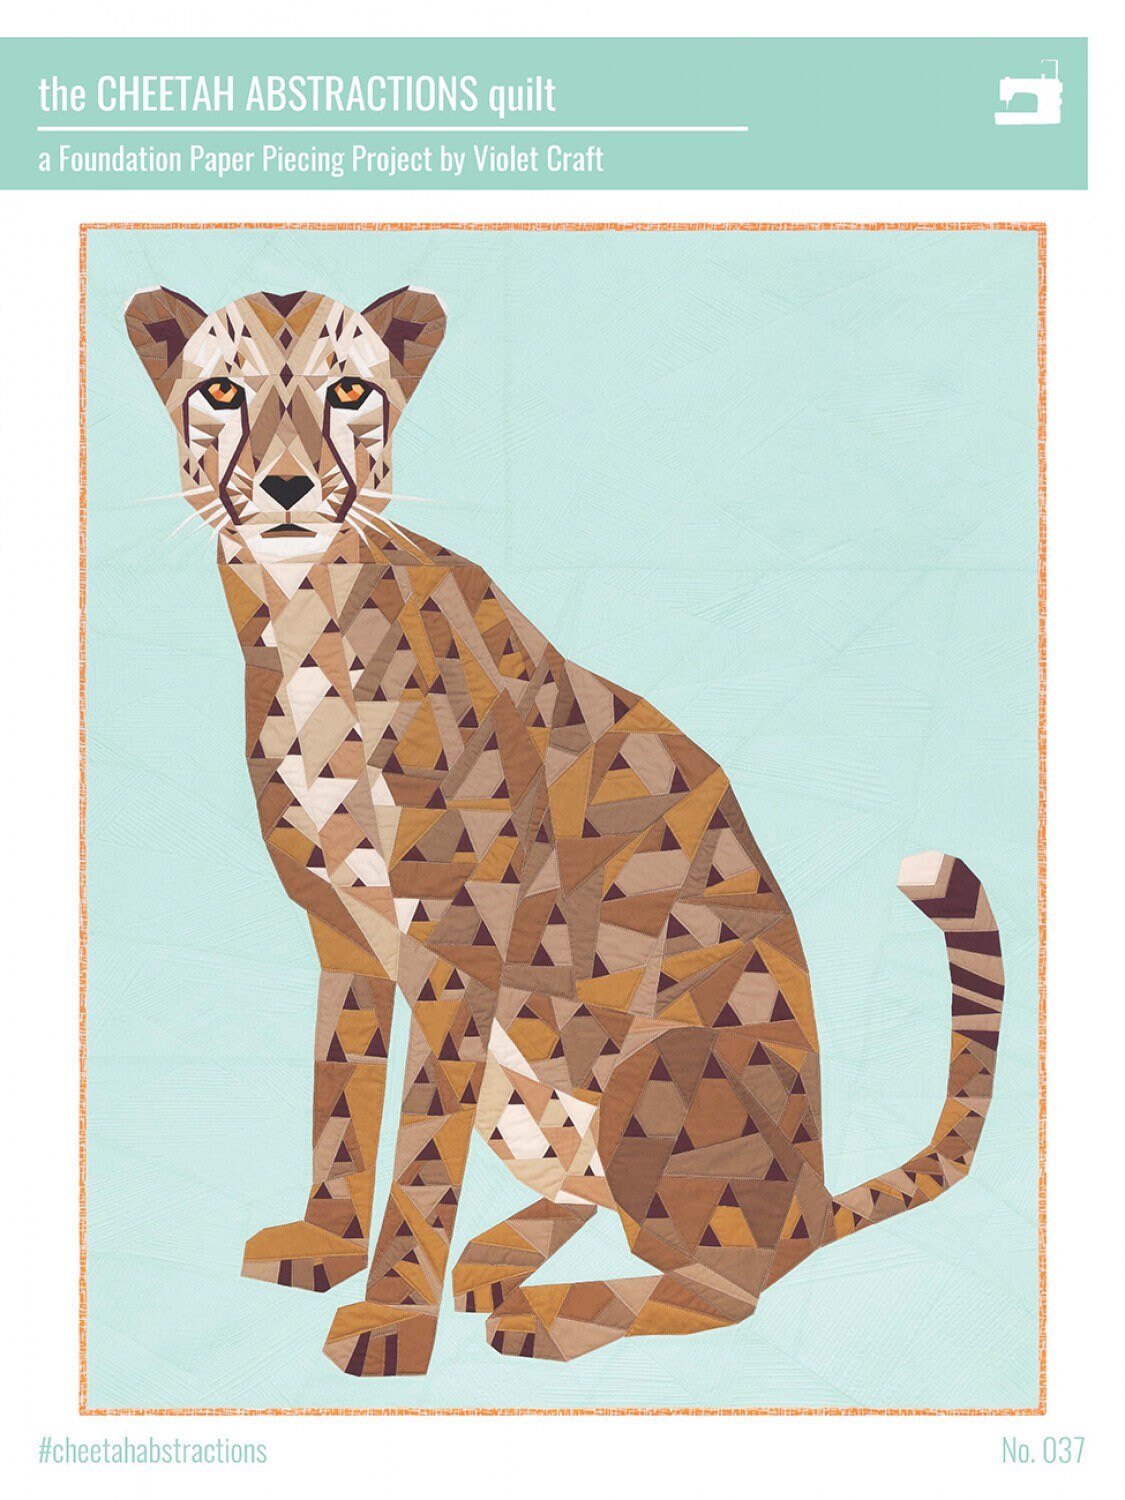 Cheetah Abstractions Quilt Pattern - Violet Craft - Foundation Paper Piecing Pattern